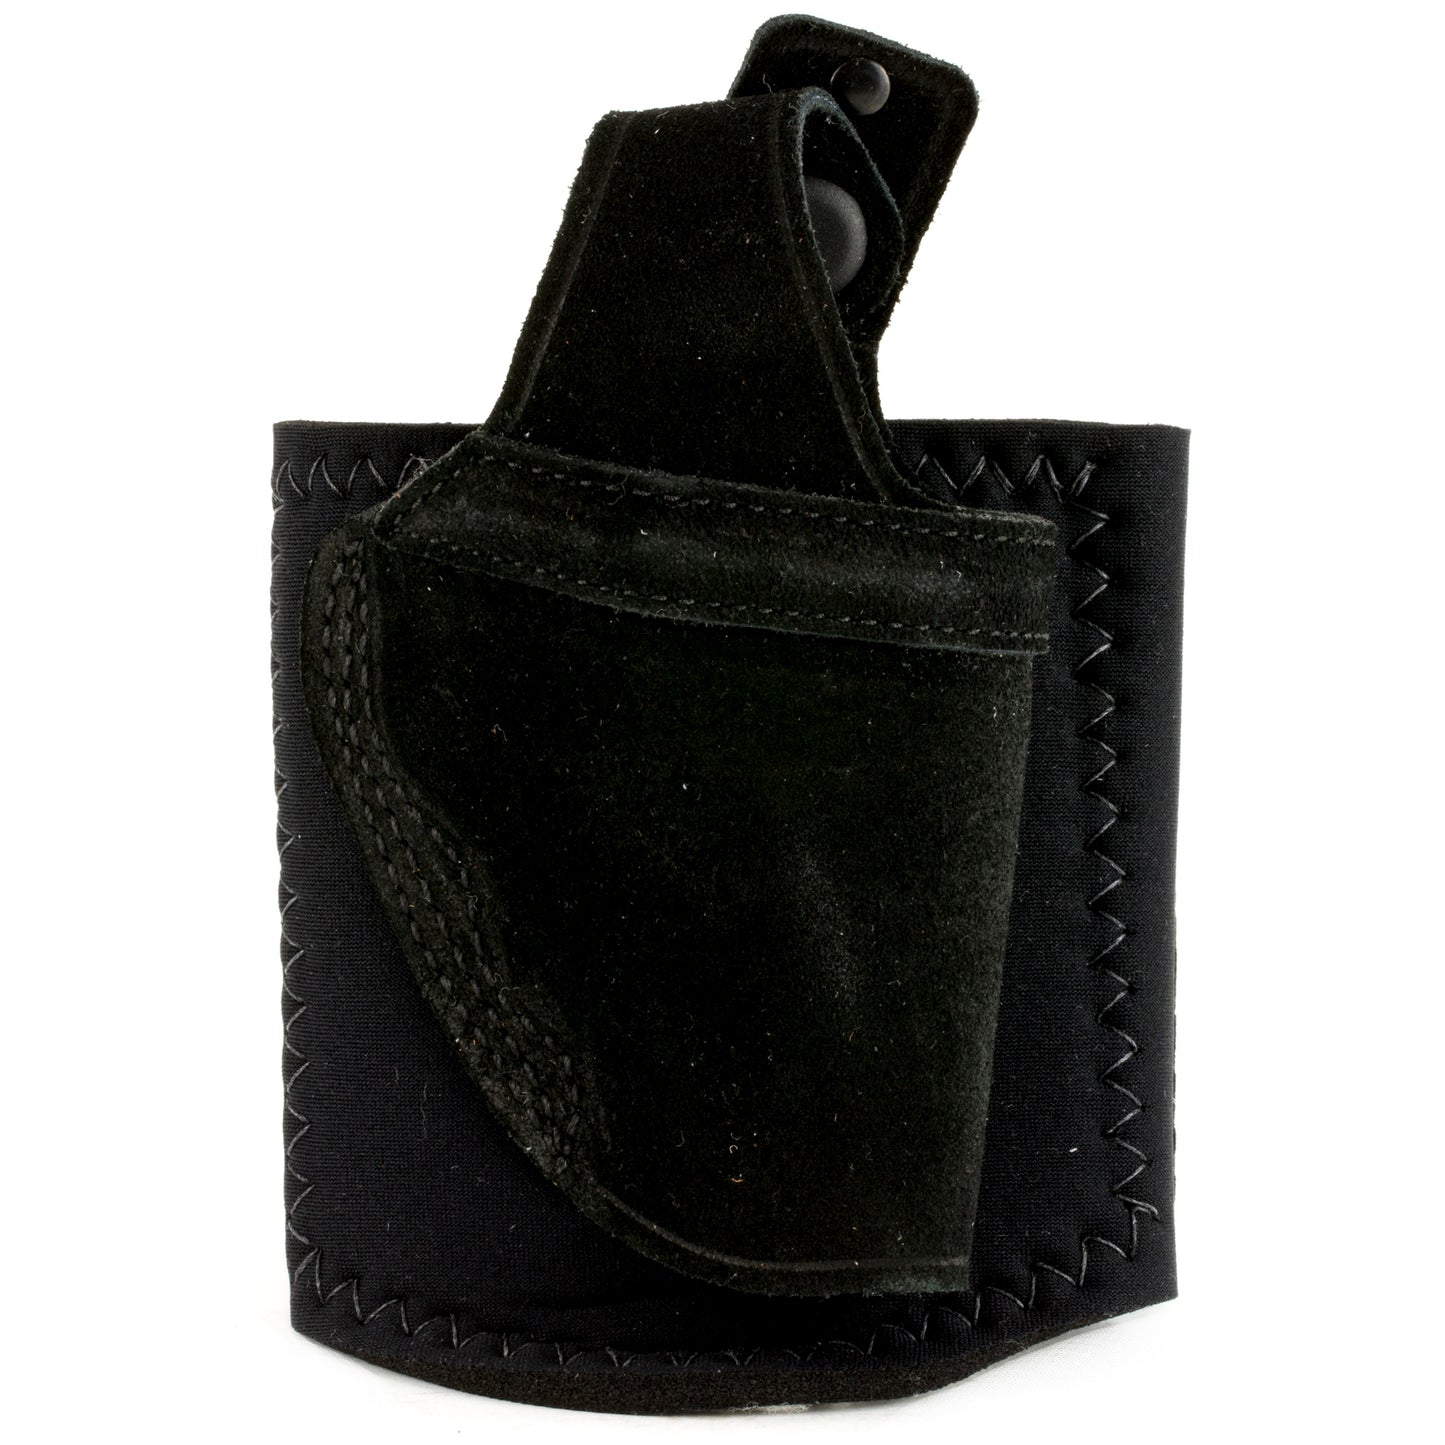 Galco Ankle Lite Ankle Holster Fits Ruger LCR 2" Right Hand Black Leather AL300B